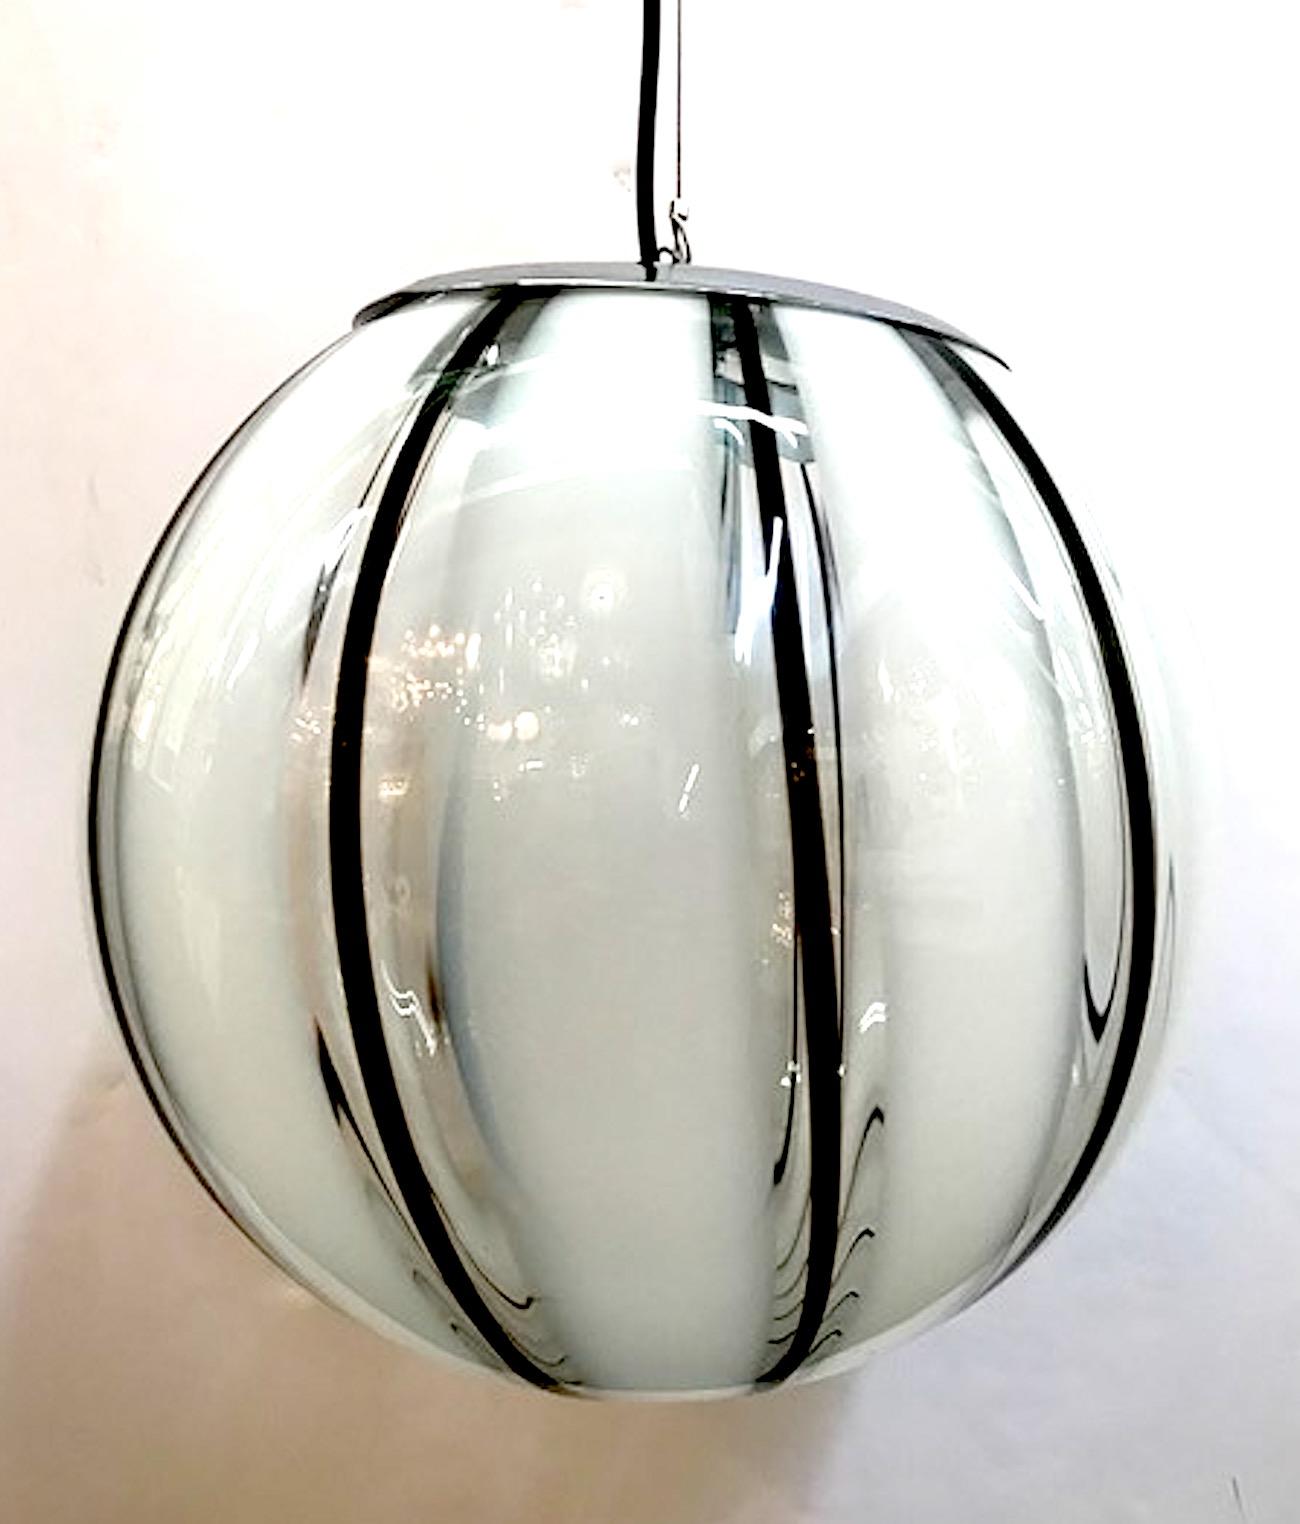 A beautifully handblown, Murano, Italy clear with narrow black and wide white stripe glass globe shade pendant light, circa 1970. Original chrome mounts and ceiling canopy. The pendant is suspended on steel cord with black electrical cord next to